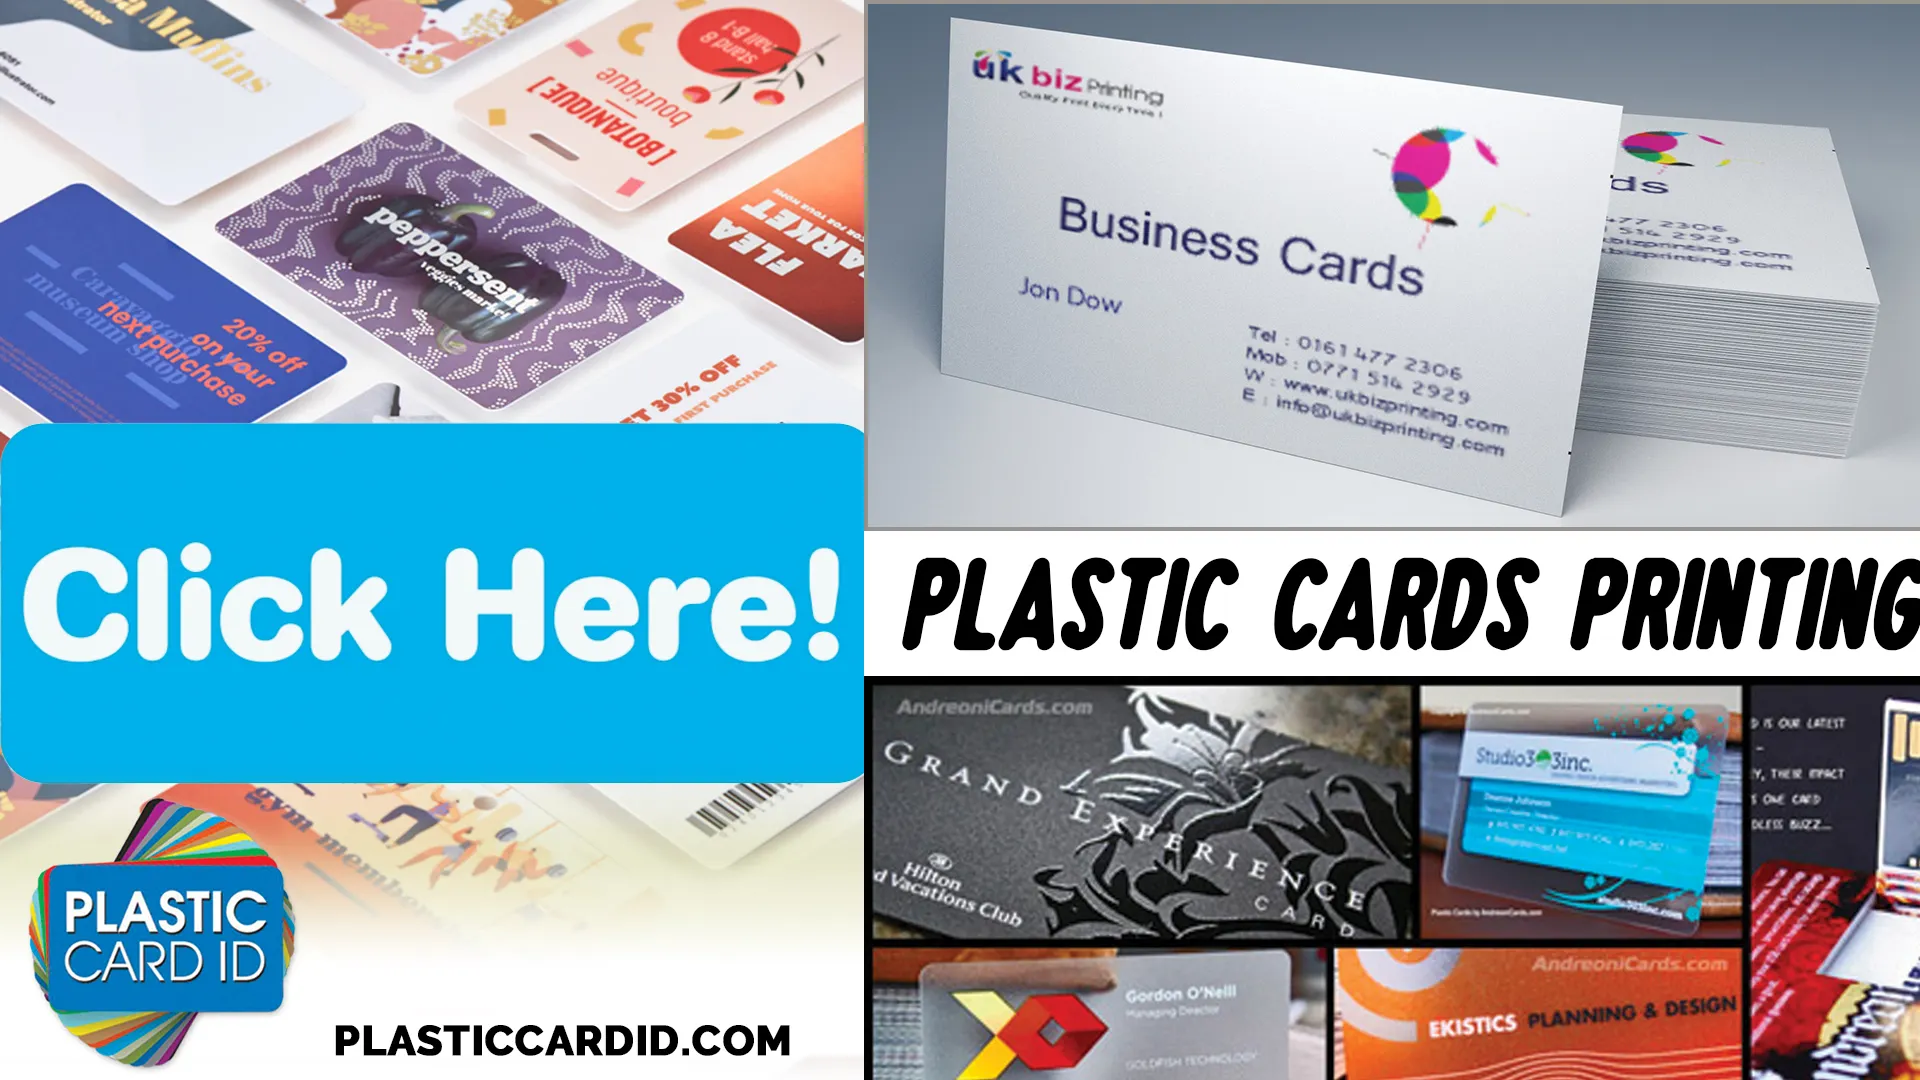 Card Printers and Supplies